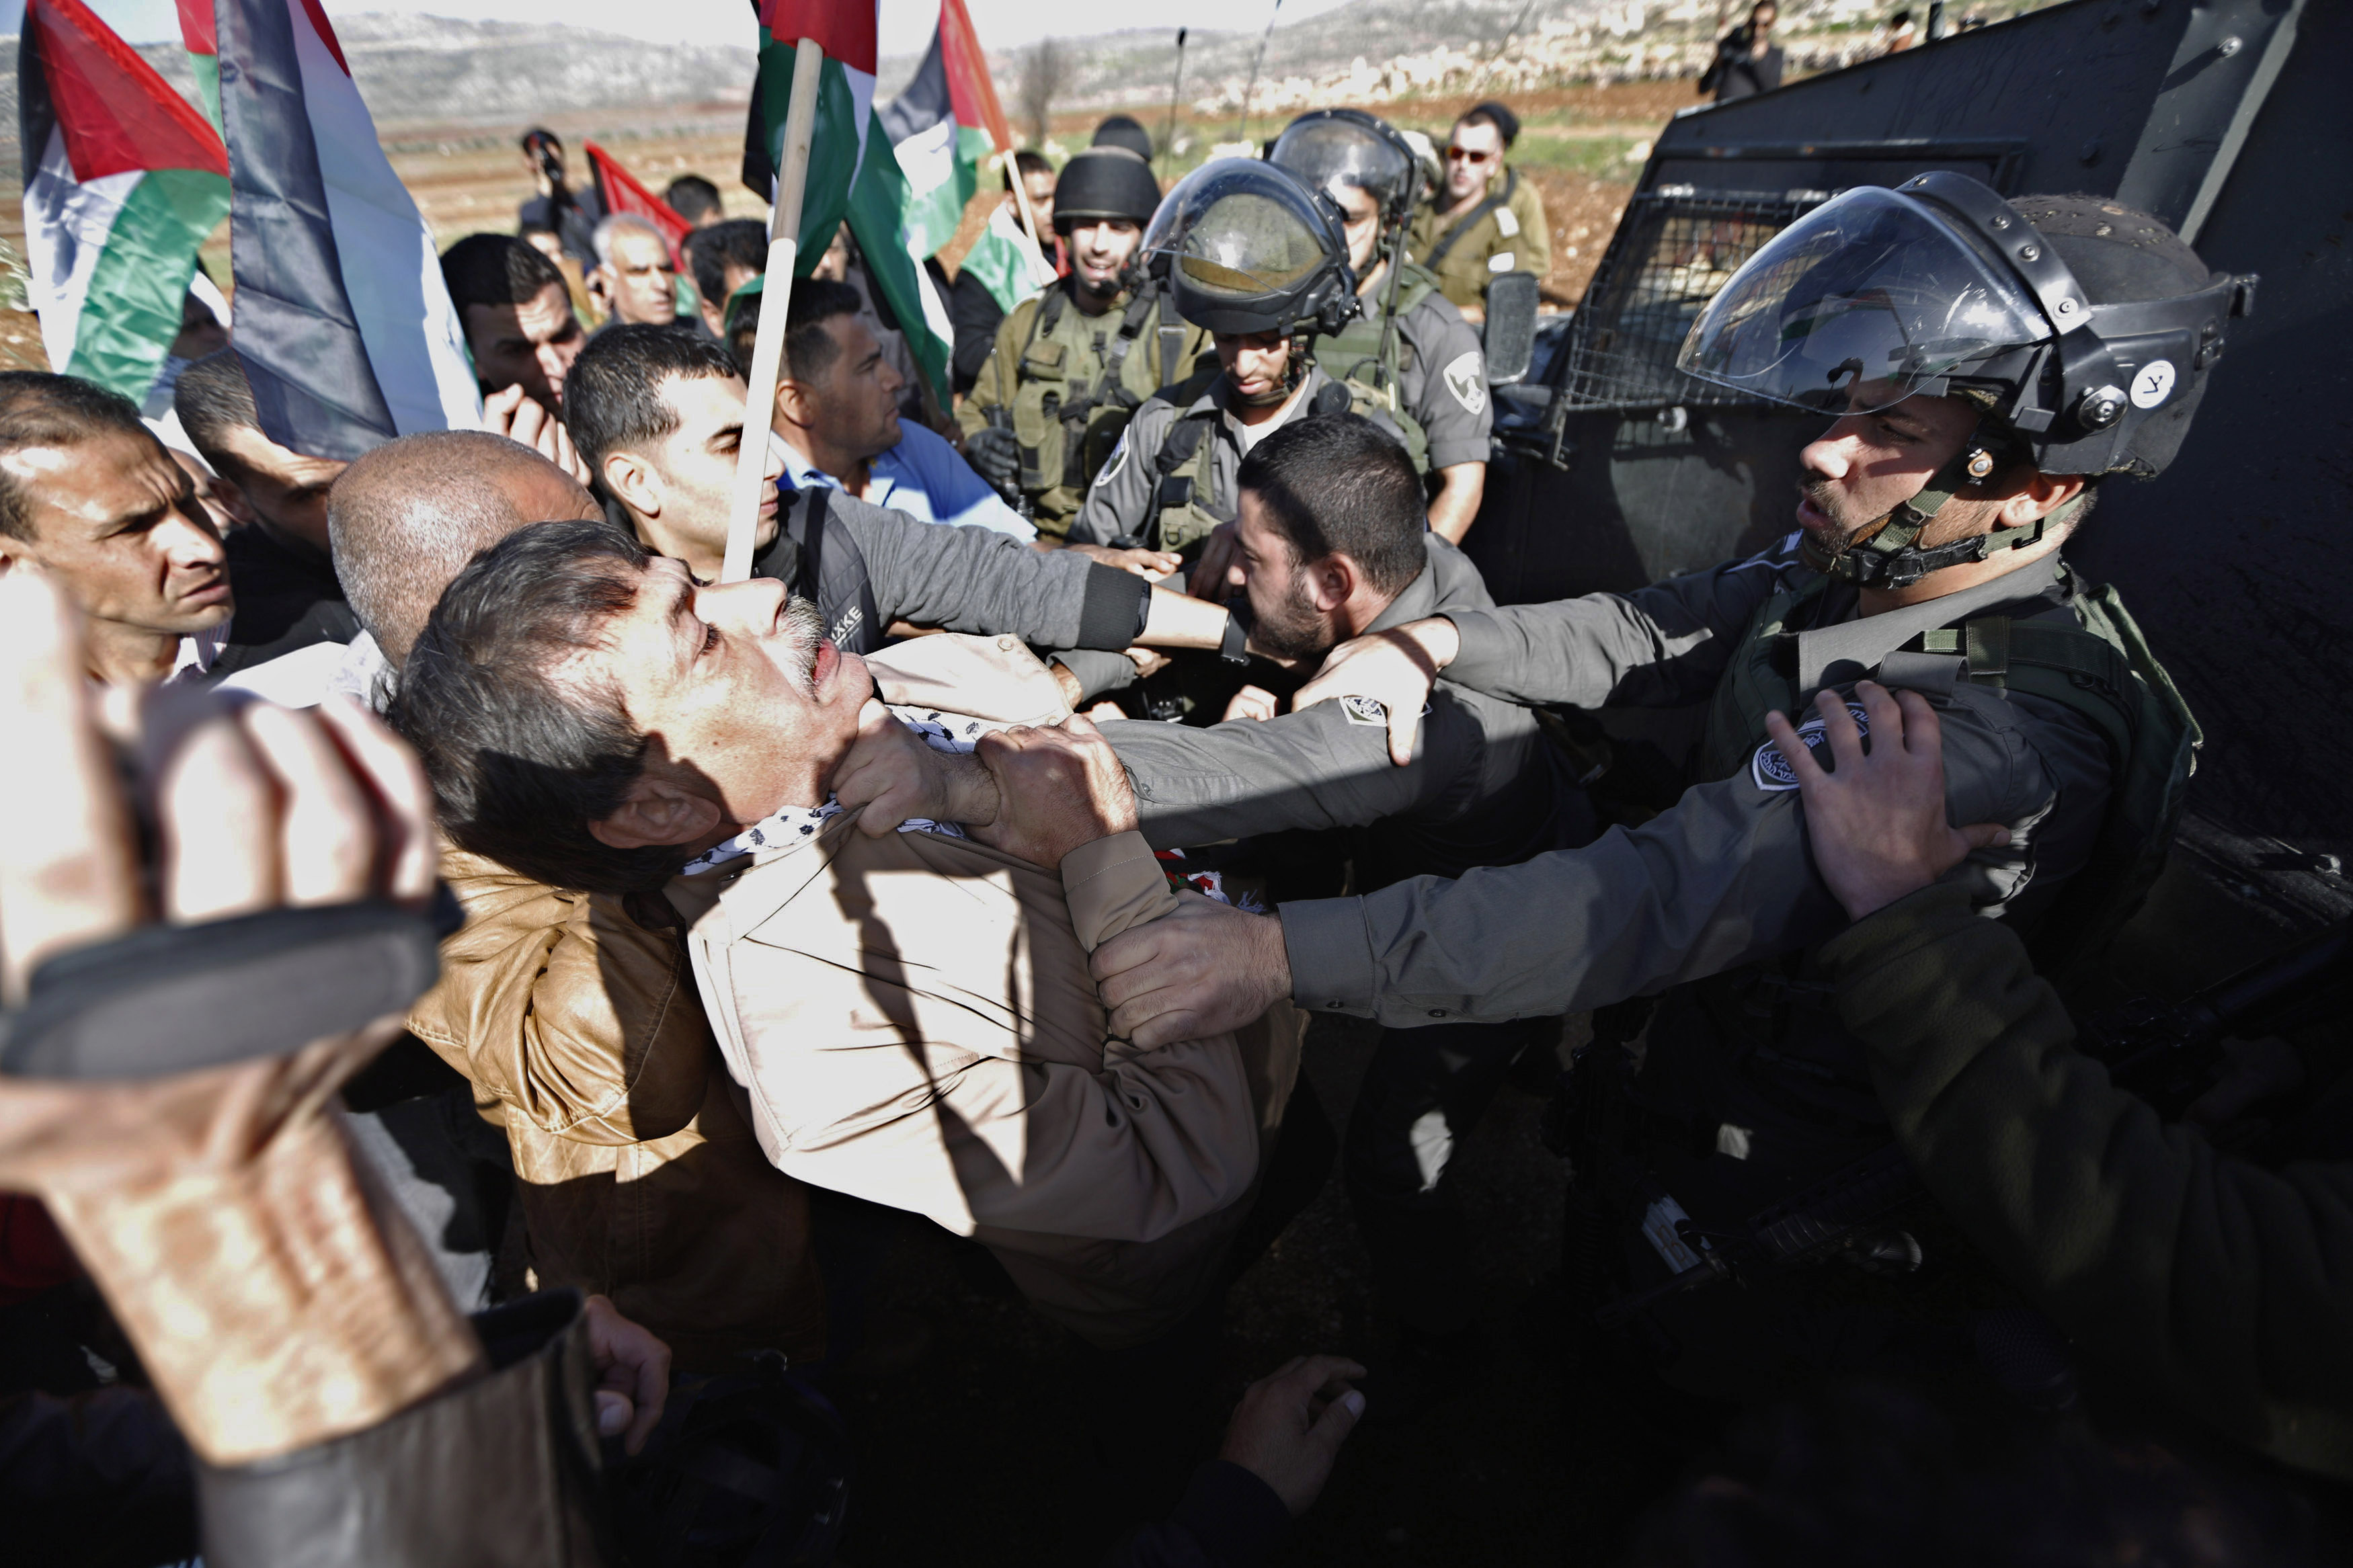 Palestinian minister Ziad Abu Ein (L) scuffles with an Israeli border policeman near the West Bank city of Ramallah December 10, 2014. Abu Ein died shortly after being hit by Israeli soldiers during a protest on Wednesday in the occupied West Bank